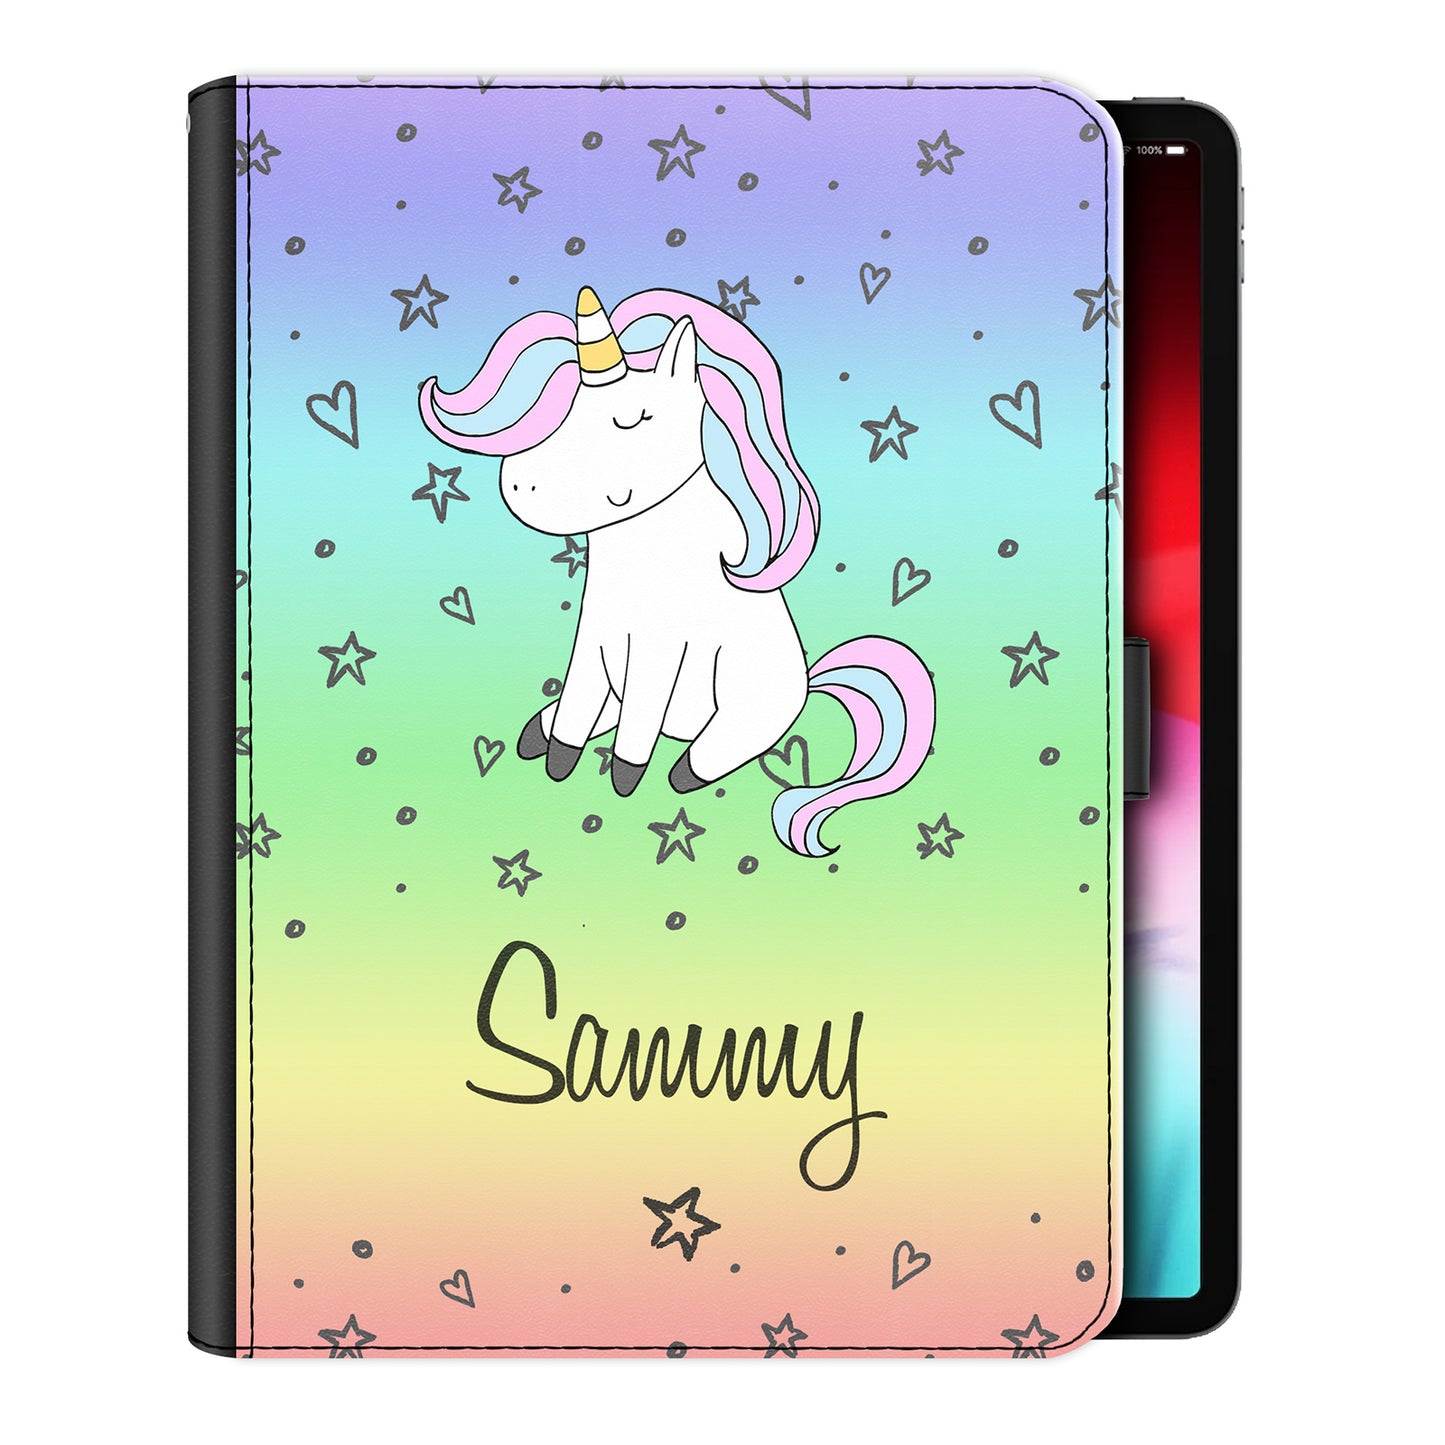 Personalised iPad Case with Pink and Blue Unicorn on Rainbow Stars and Hearts 